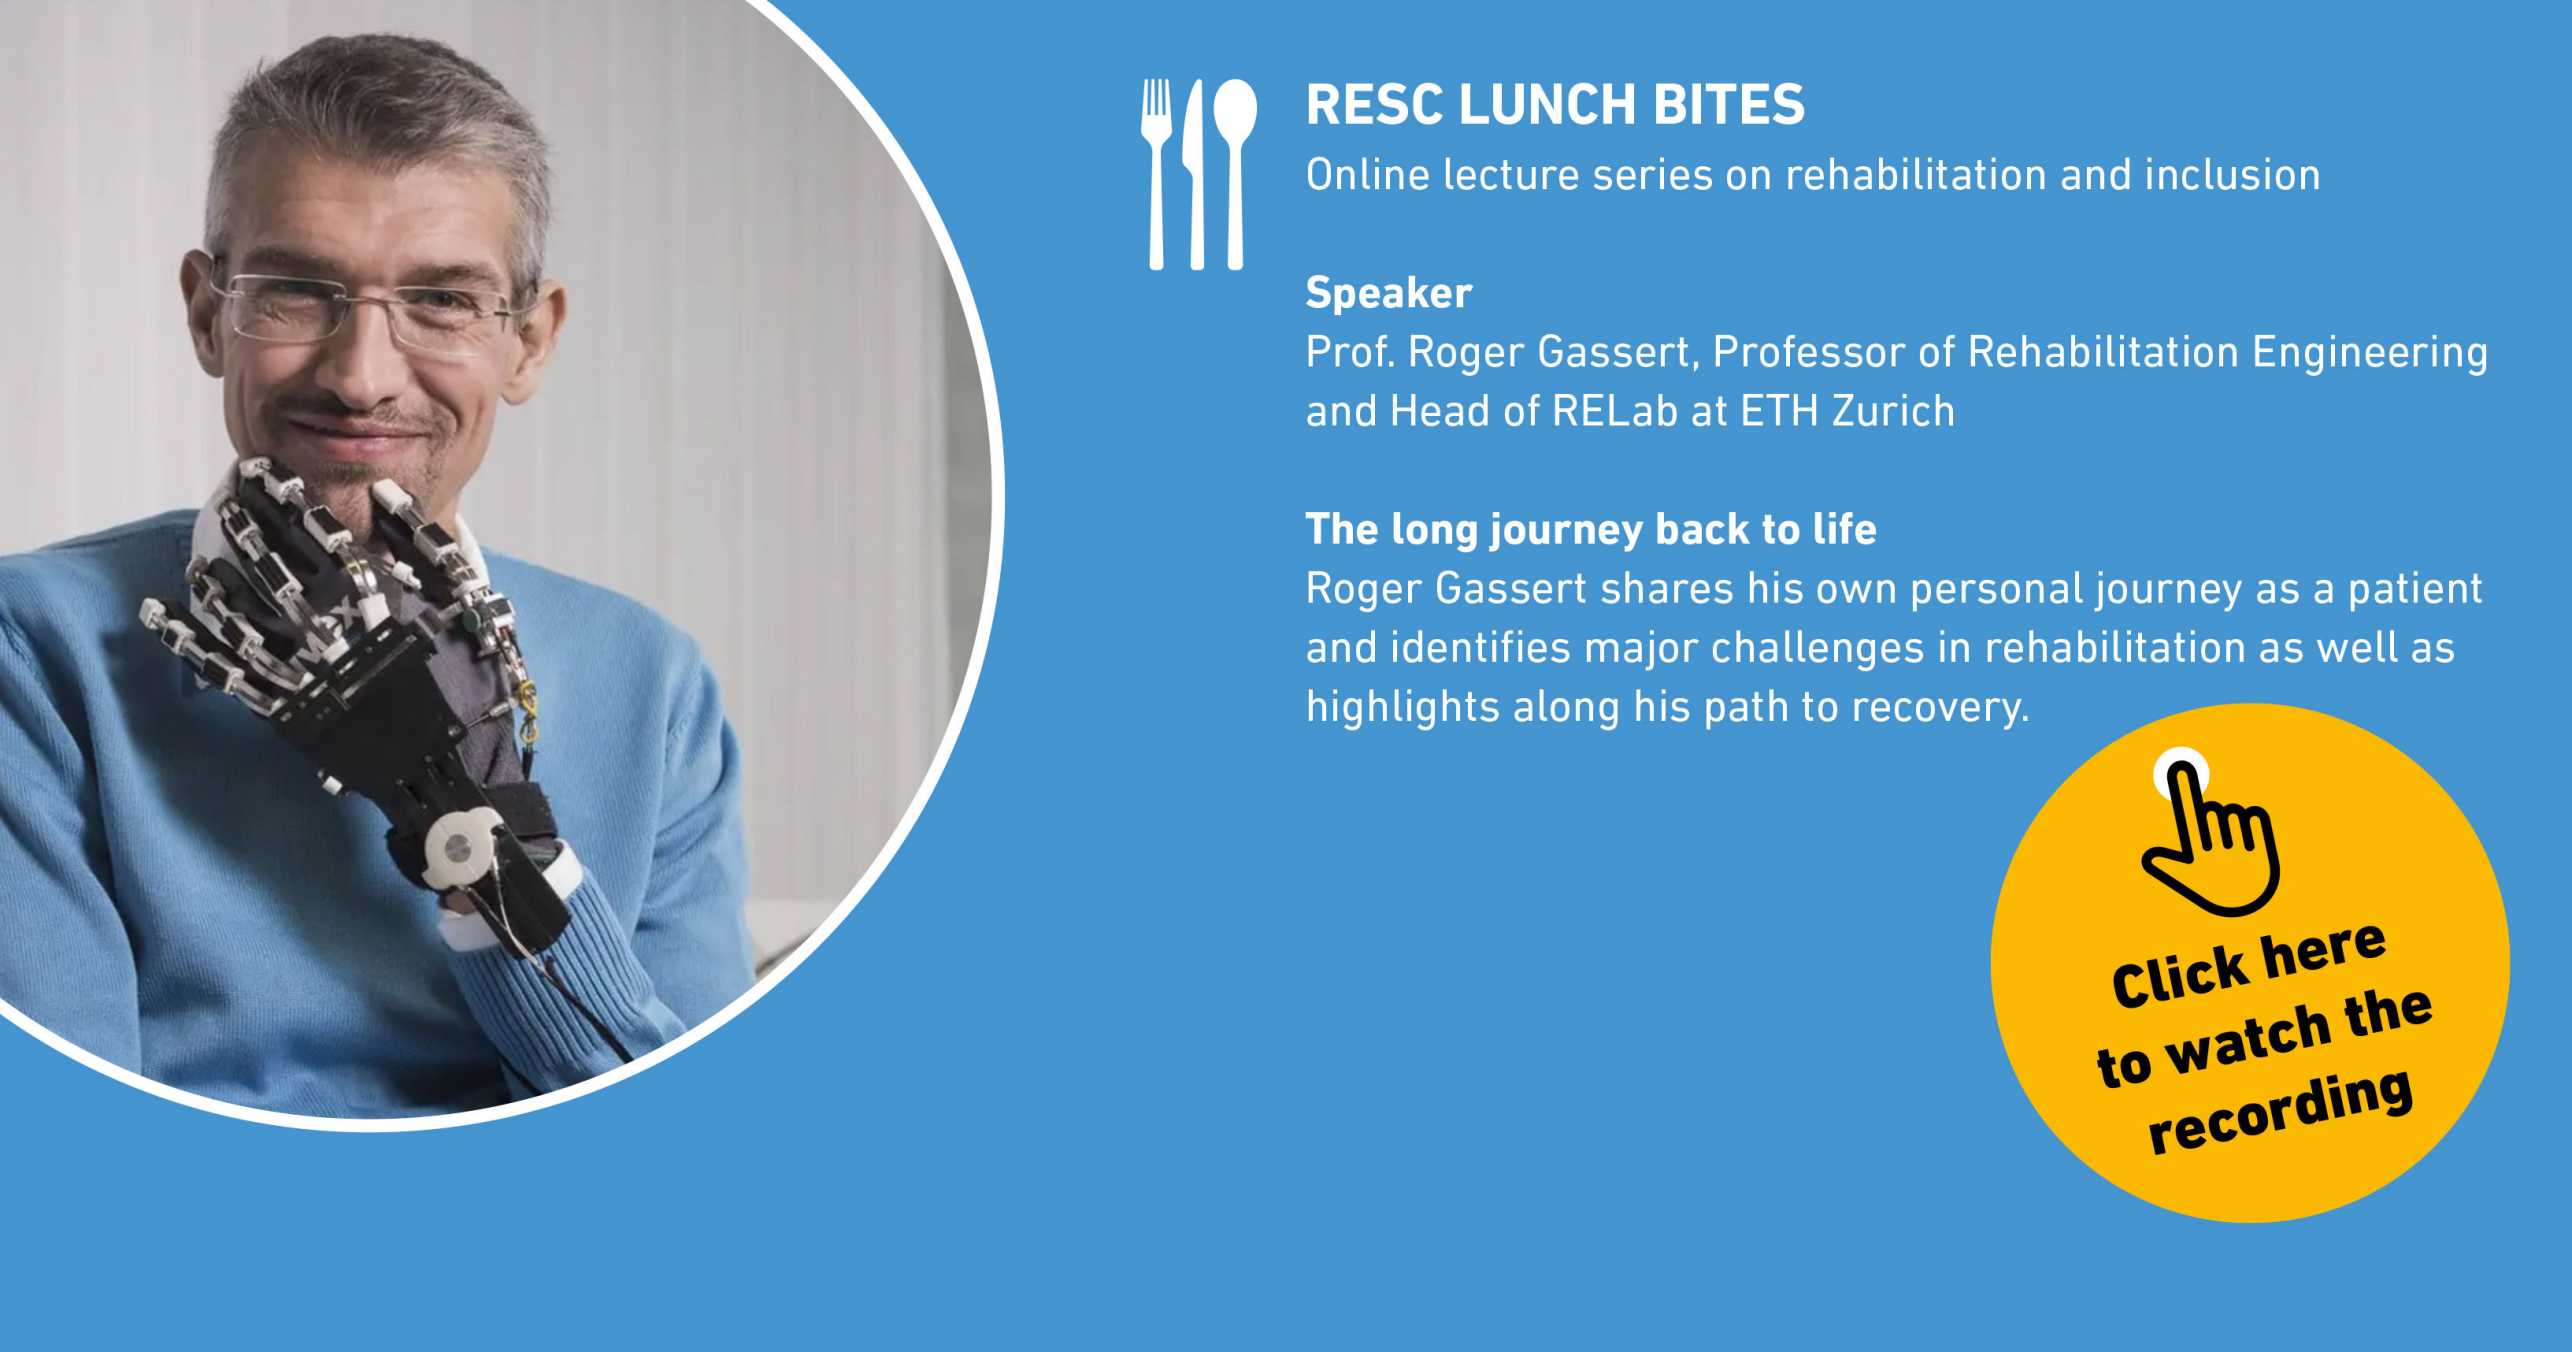 RESC Lunch Bites Online Lecture Series Announcement with image by Roger Gassert.